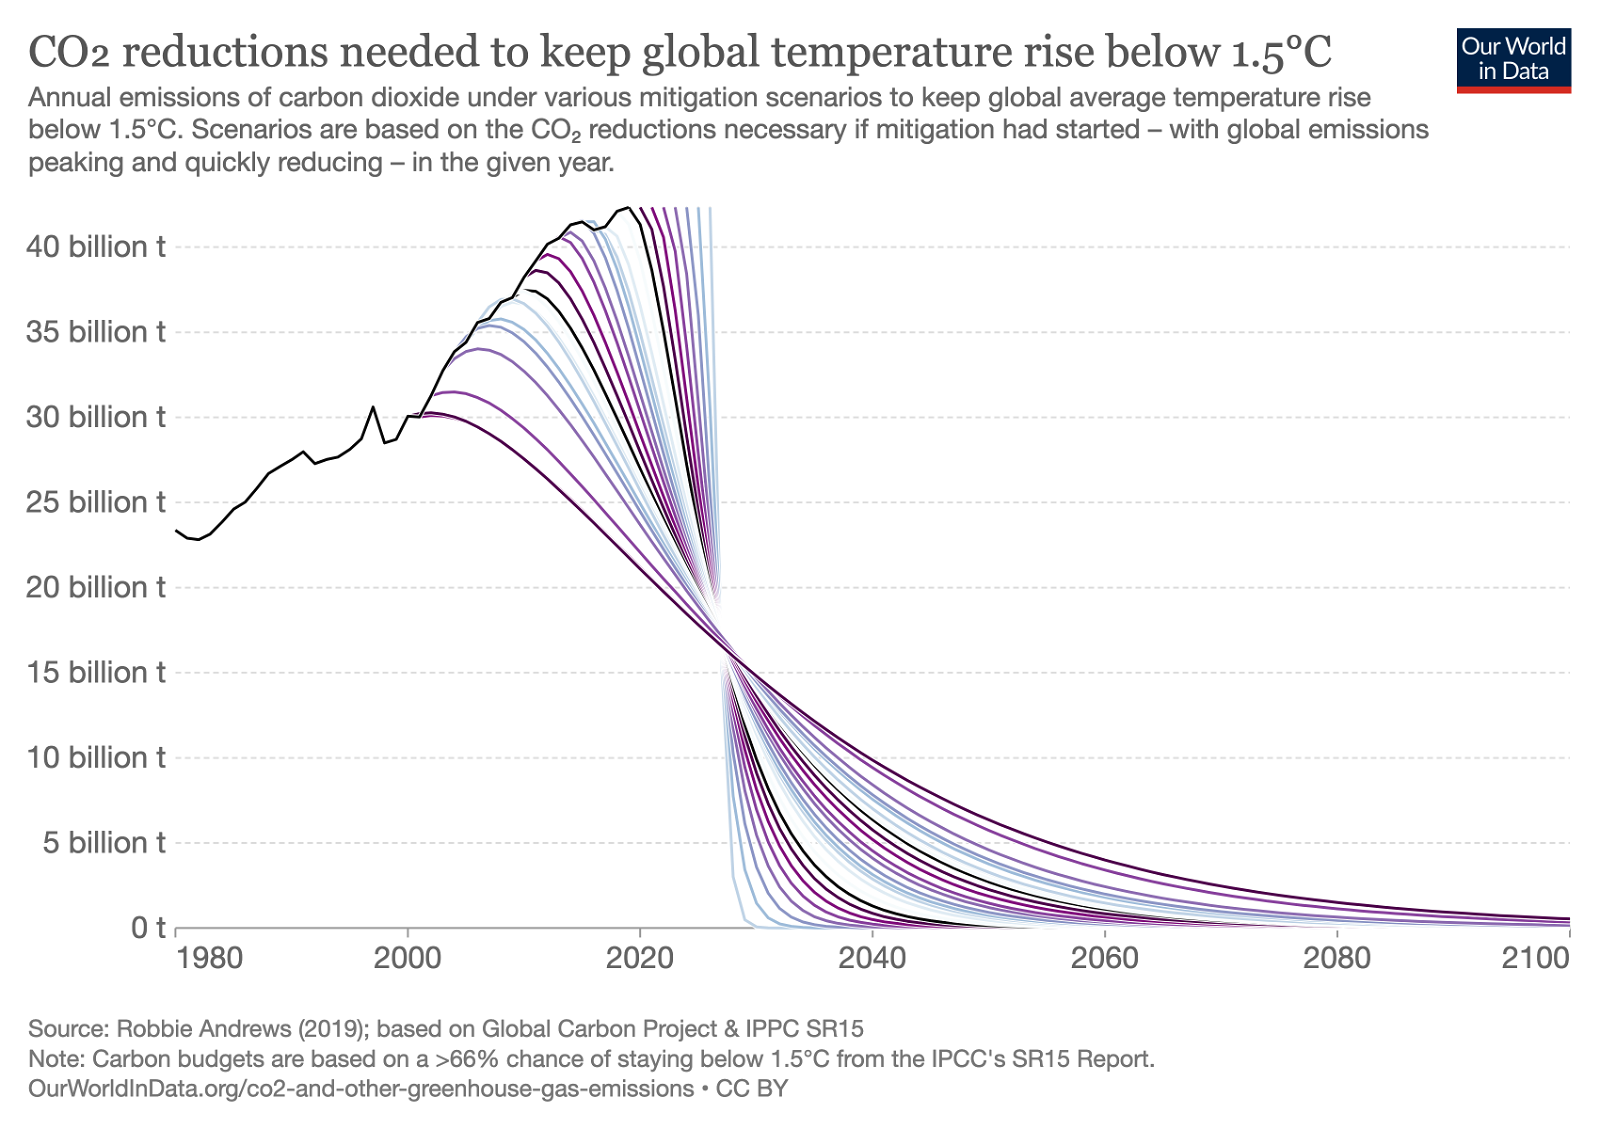 Figure 3: the emissions reductions needed to keep warming below 1.5C are much steeper now than if we had started the process decades ago.